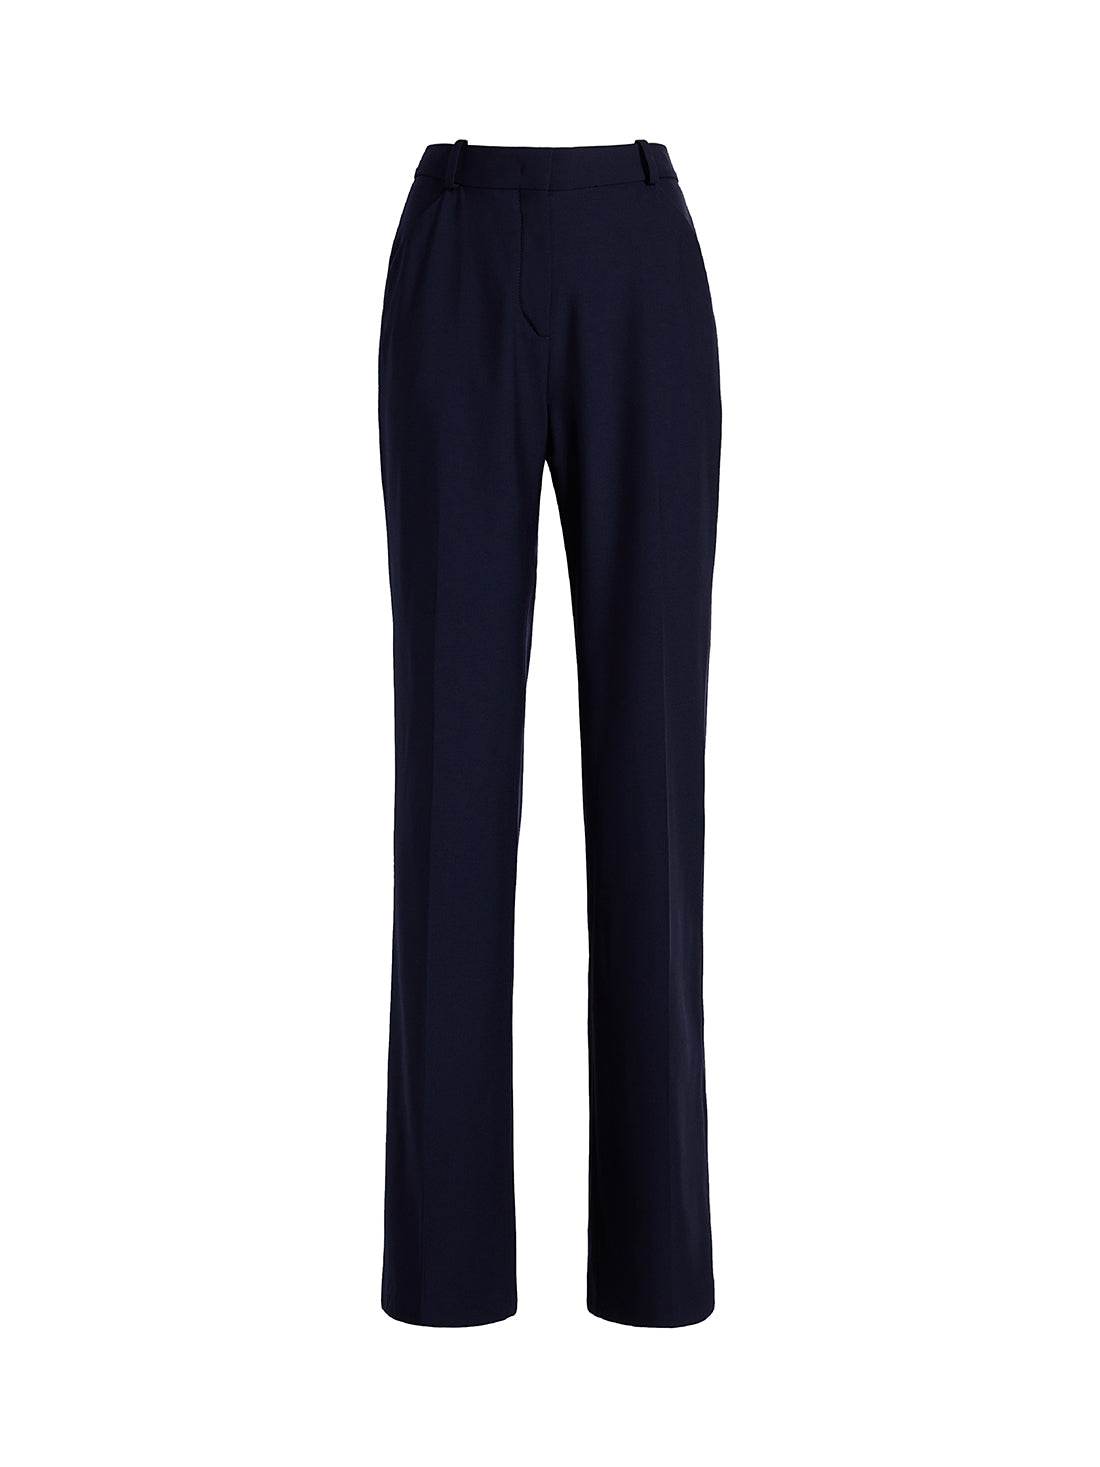 Theory Trecca Pants in Navy – Raggs - Fashion for Men and Women